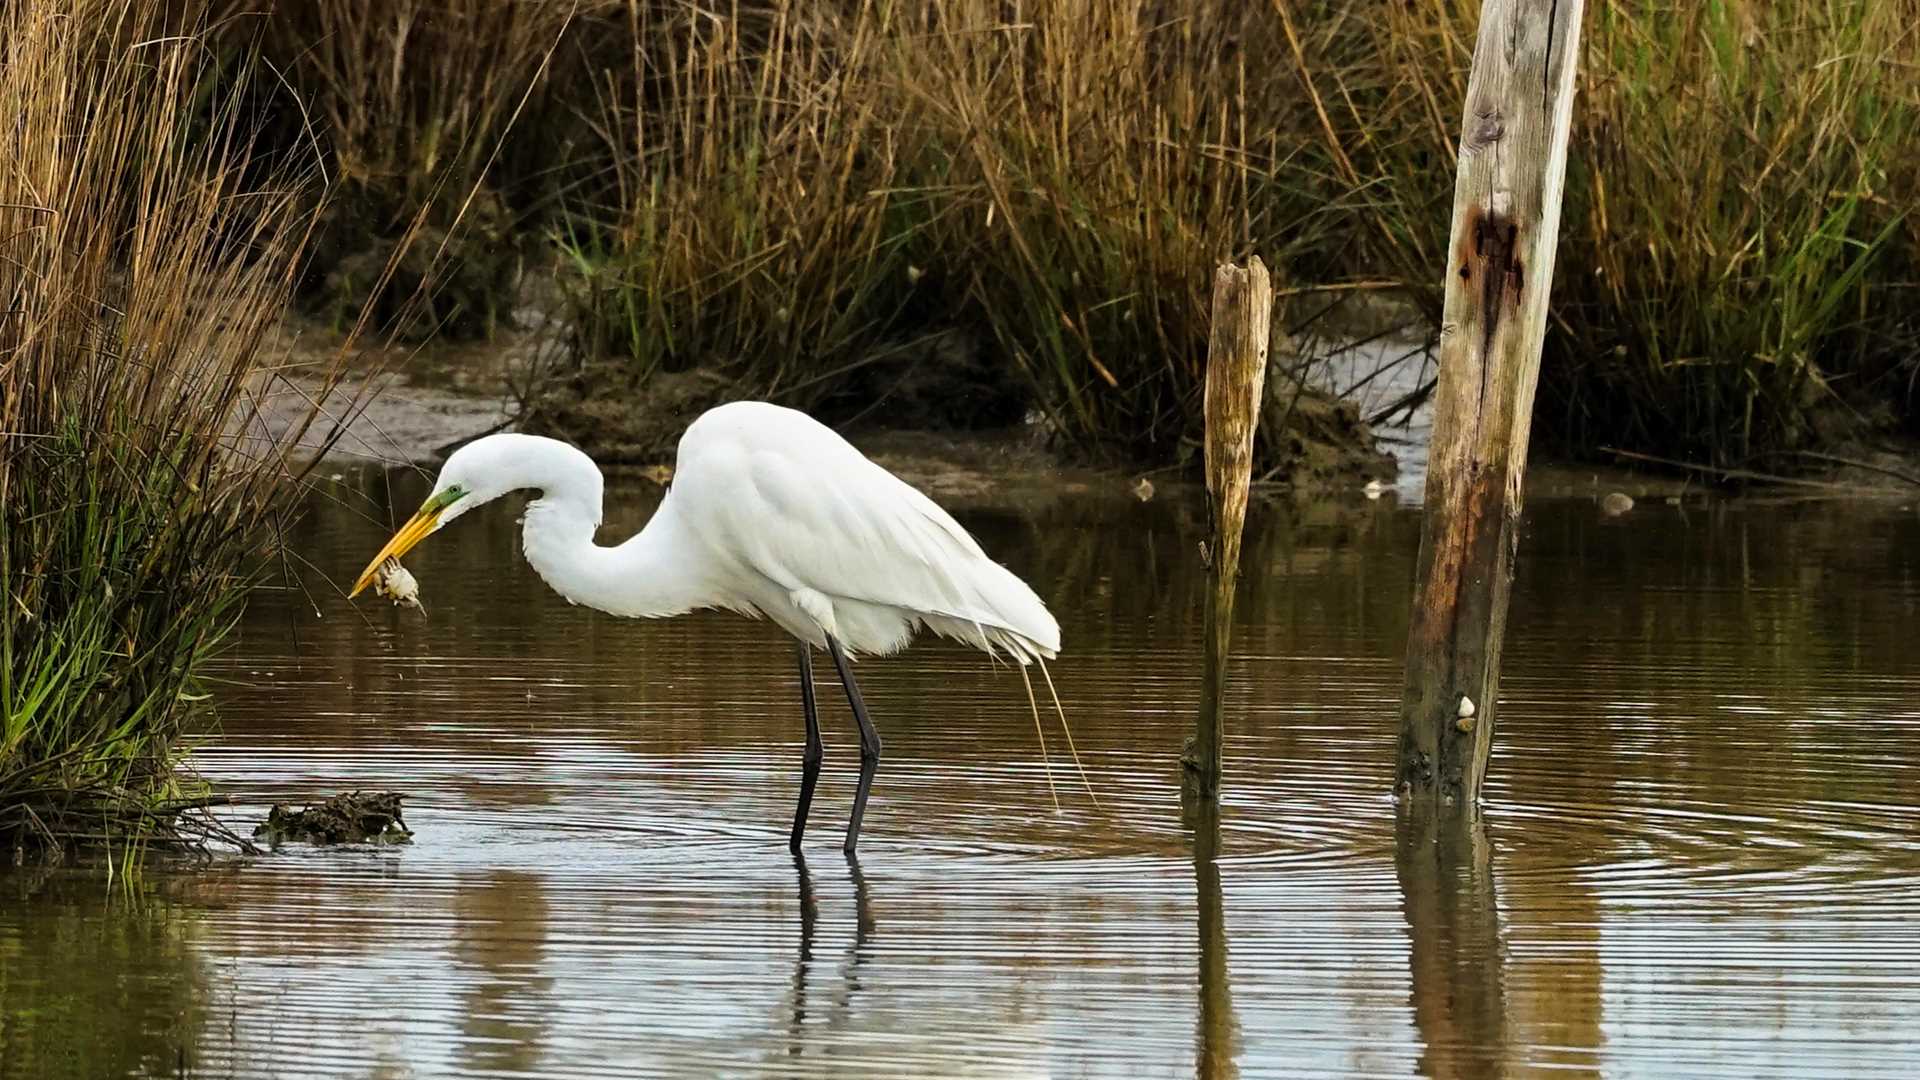 A great egret catching a crab in shallow water